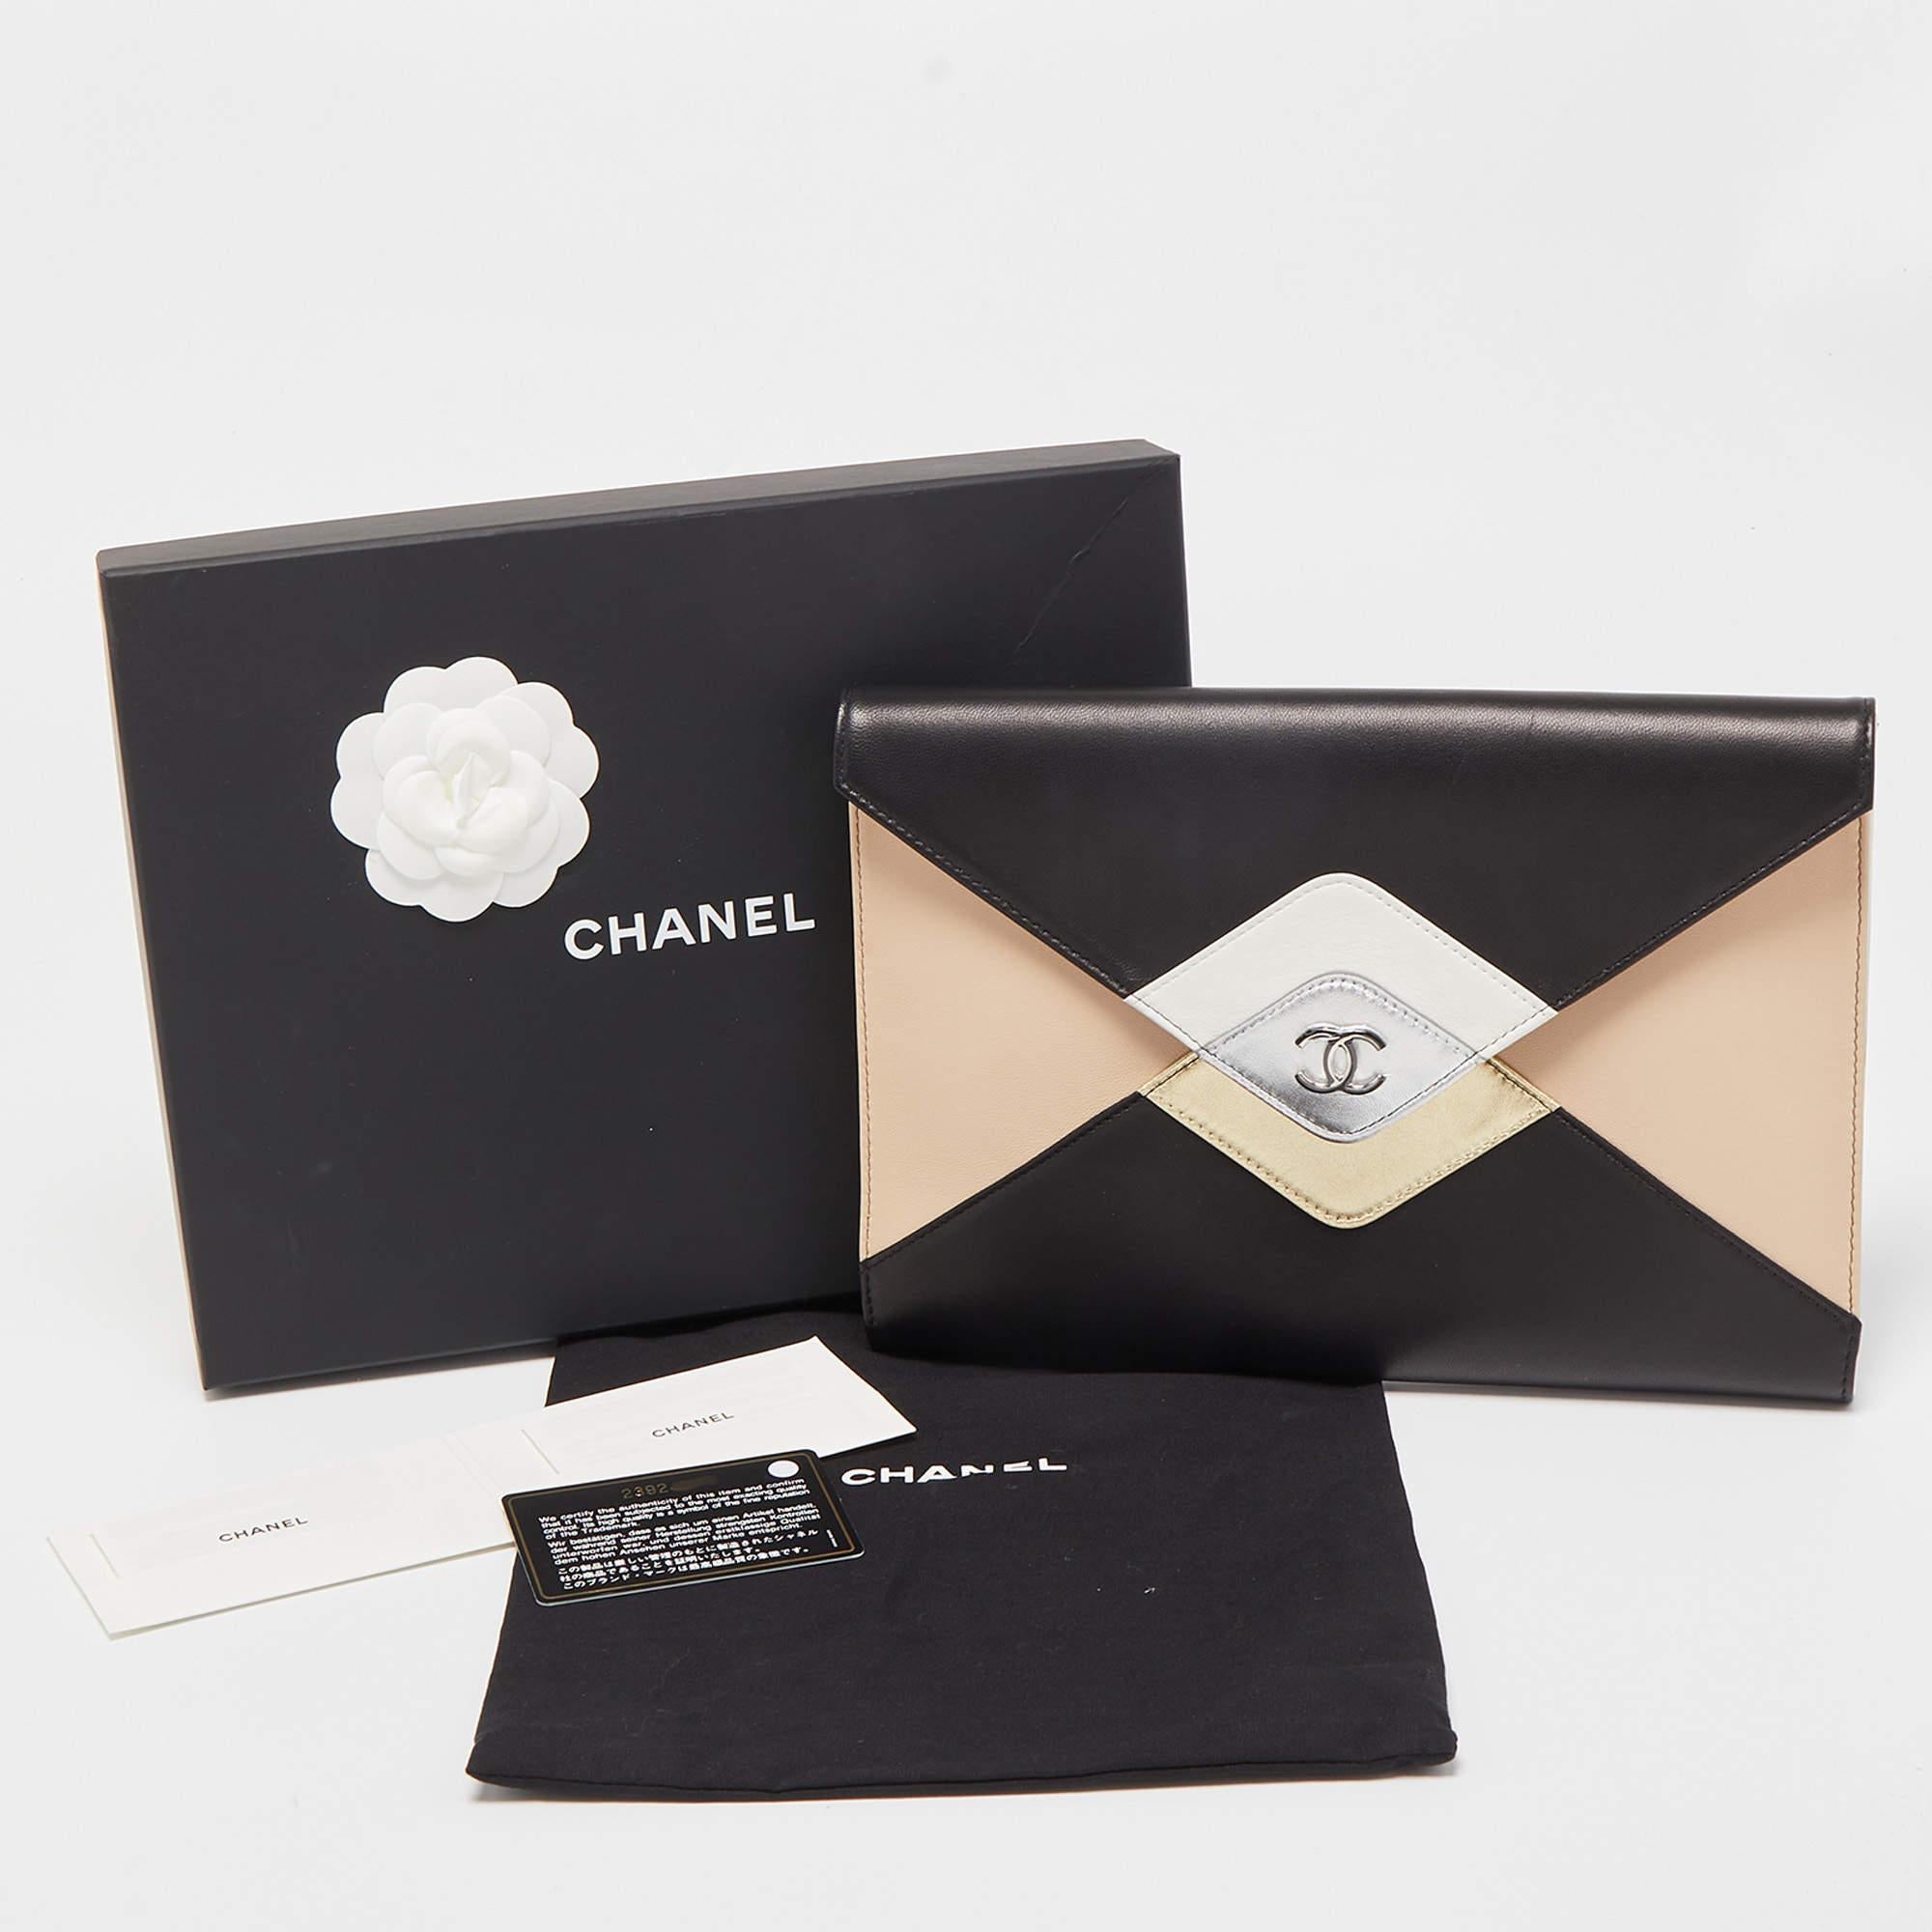 The Chanel clutch is an exquisite accessory. Crafted from premium leather, it features the iconic CC logo, adorned with a vibrant multicolored pattern. With a sleek, compact design, it's perfect for adding a touch of luxury and style to any outfit.

